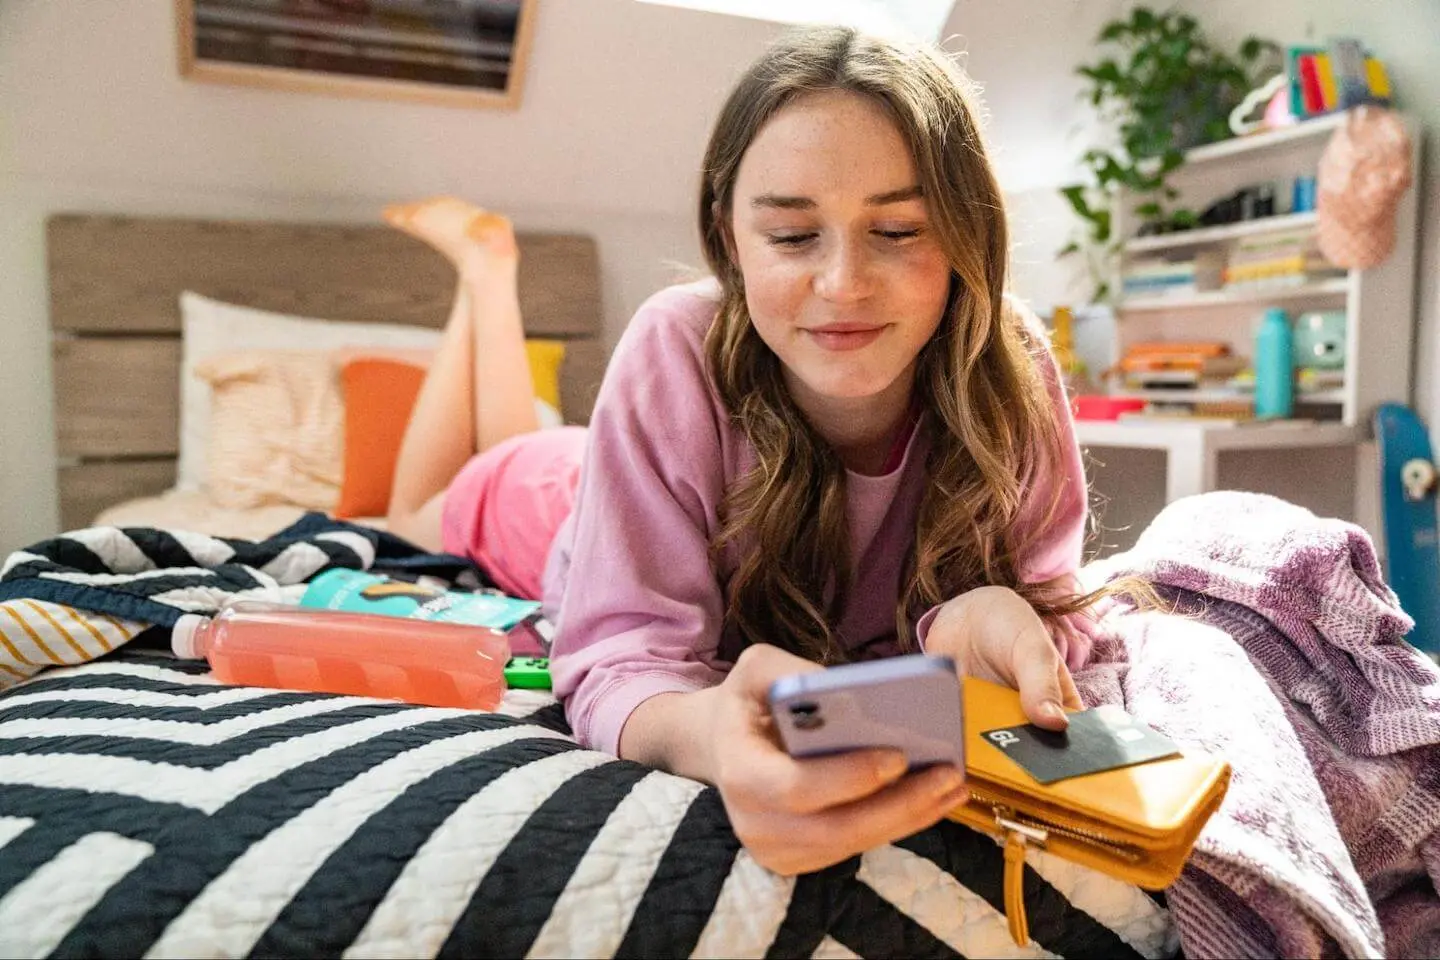 How to make passive income as a teenager: teenager using her phone while lying on a bed